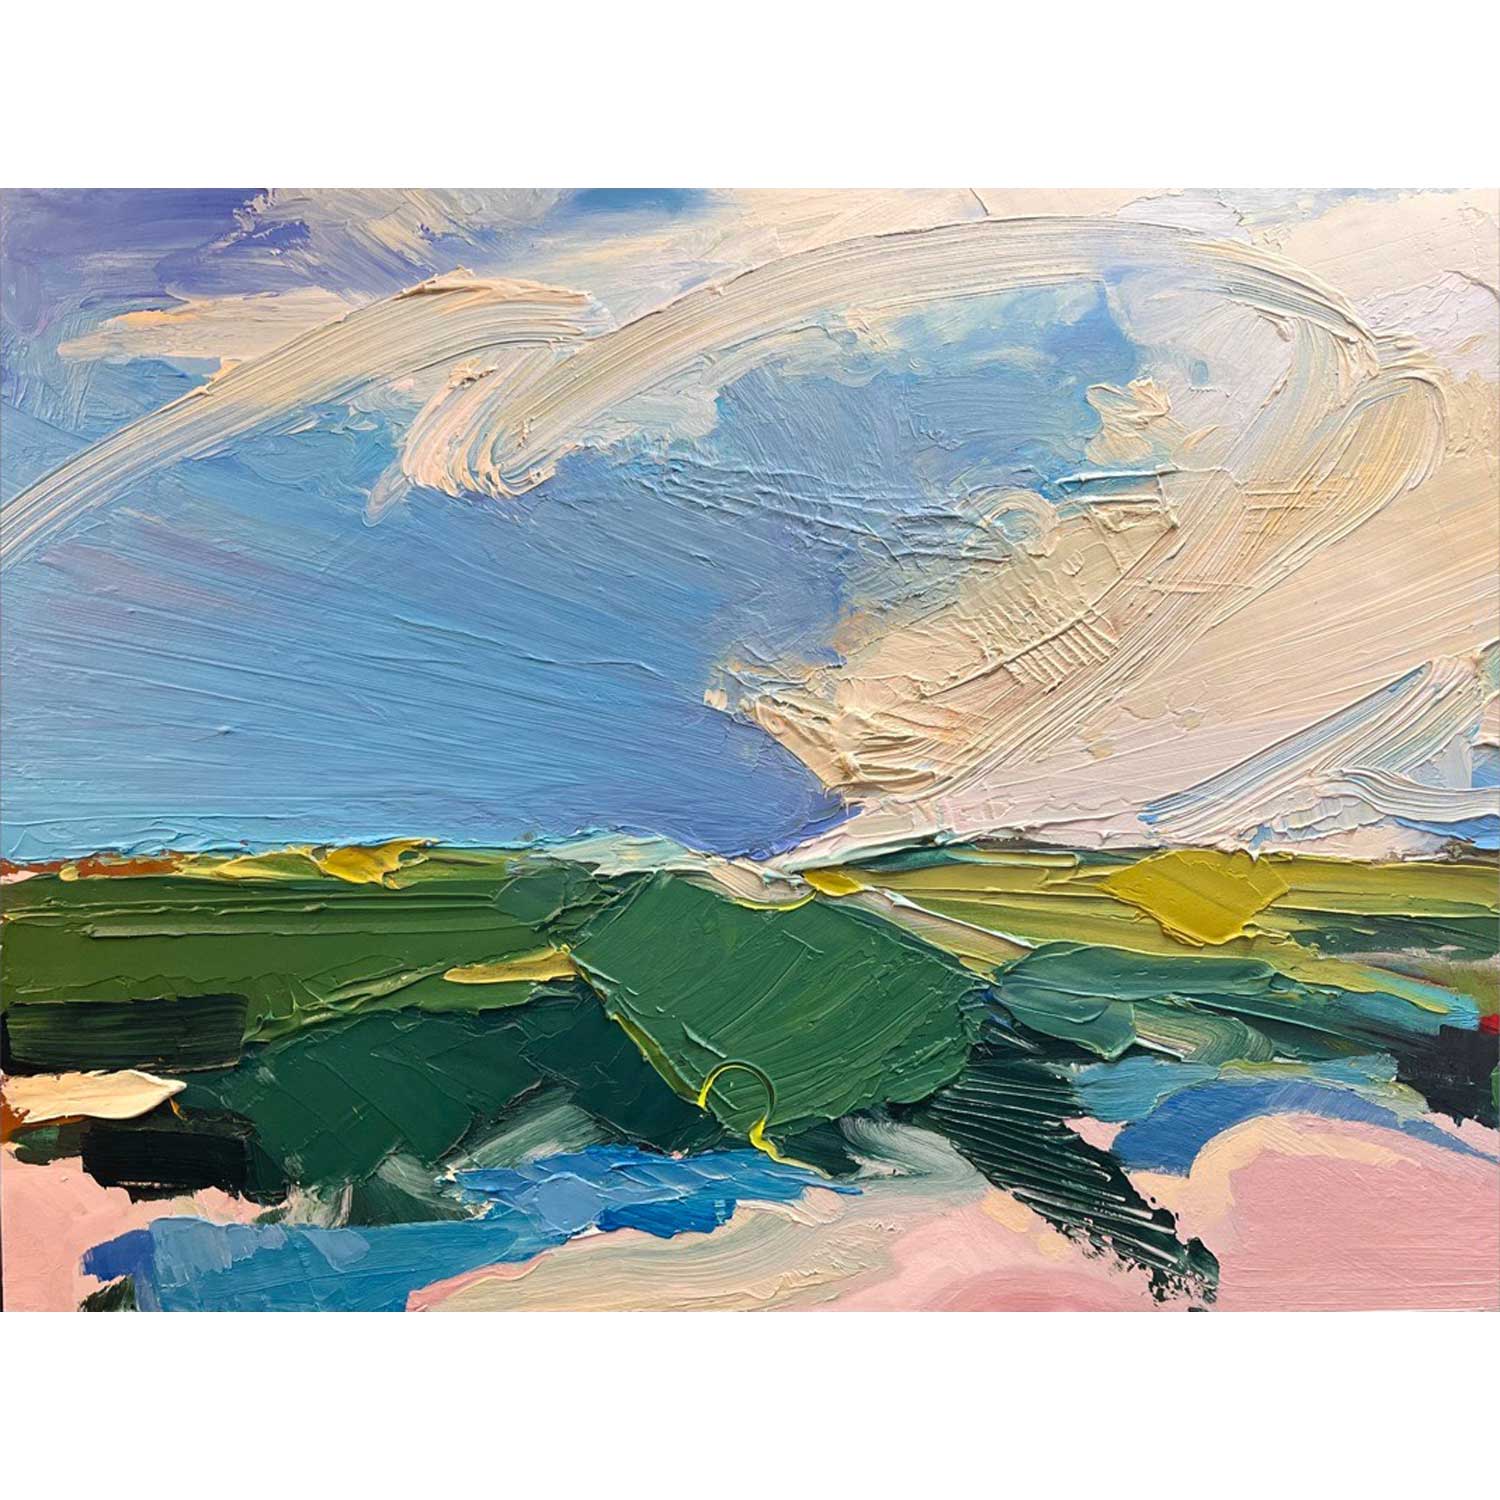 Finding A Rhythm in the Clouds 36" x 48"